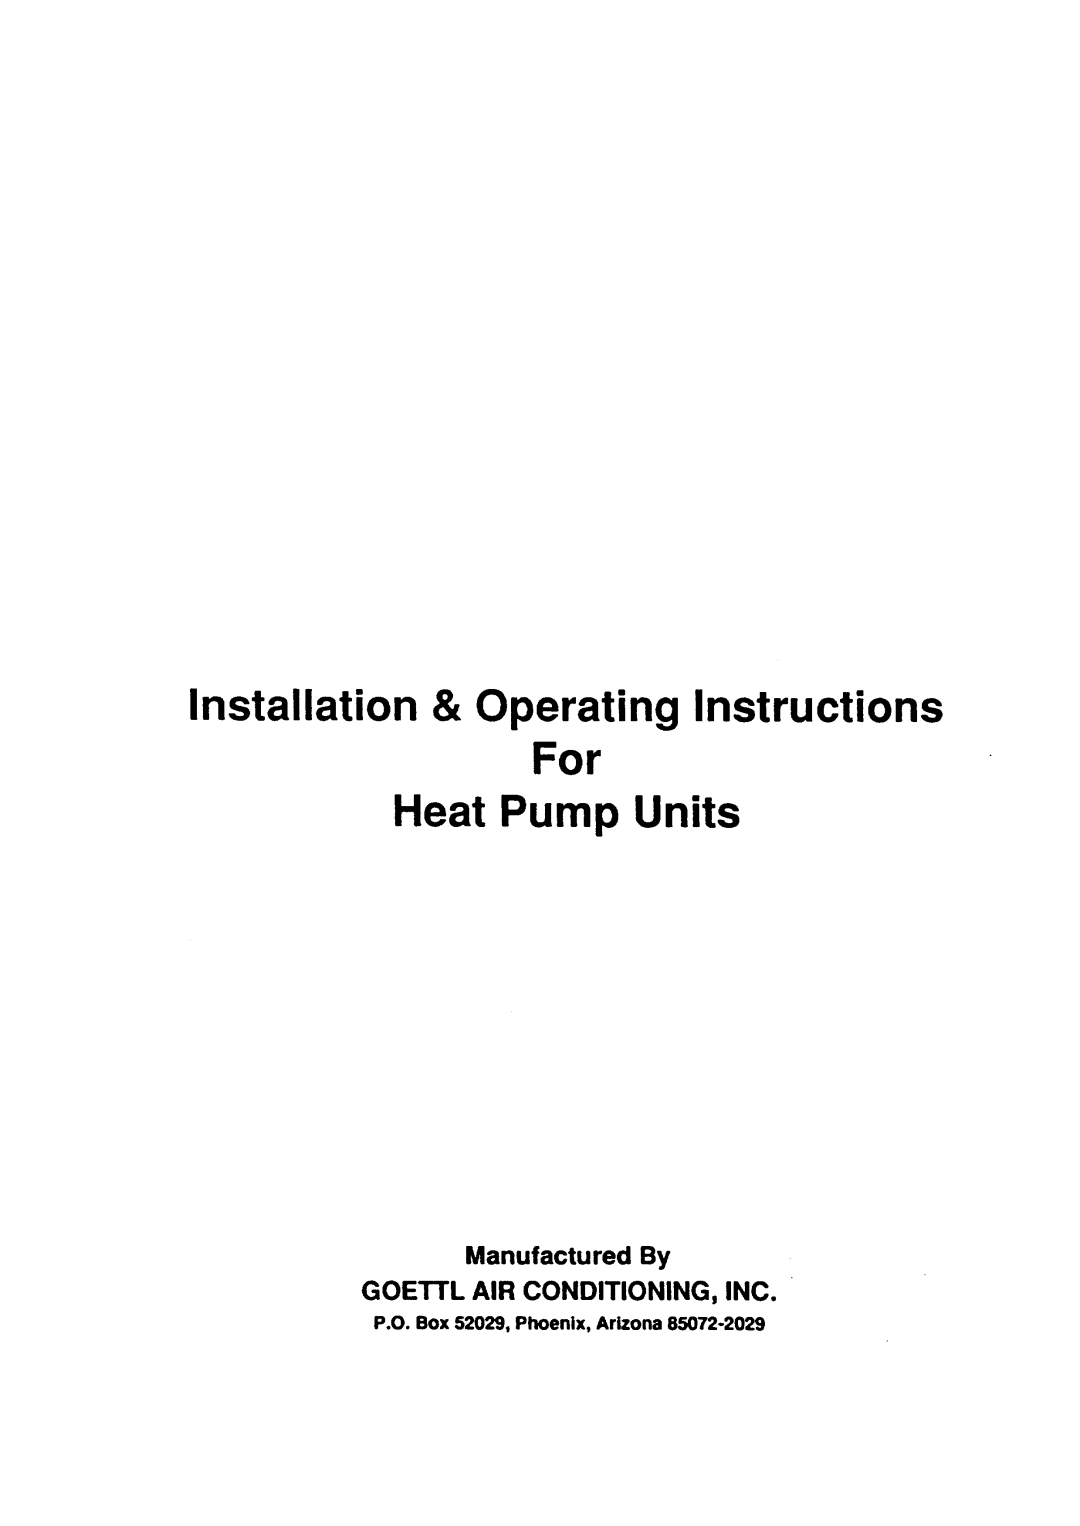 Goetti Air Conditioning manual Manufactured By GOETTL AIR CONDITIONING, INC, Heat Pump Units 